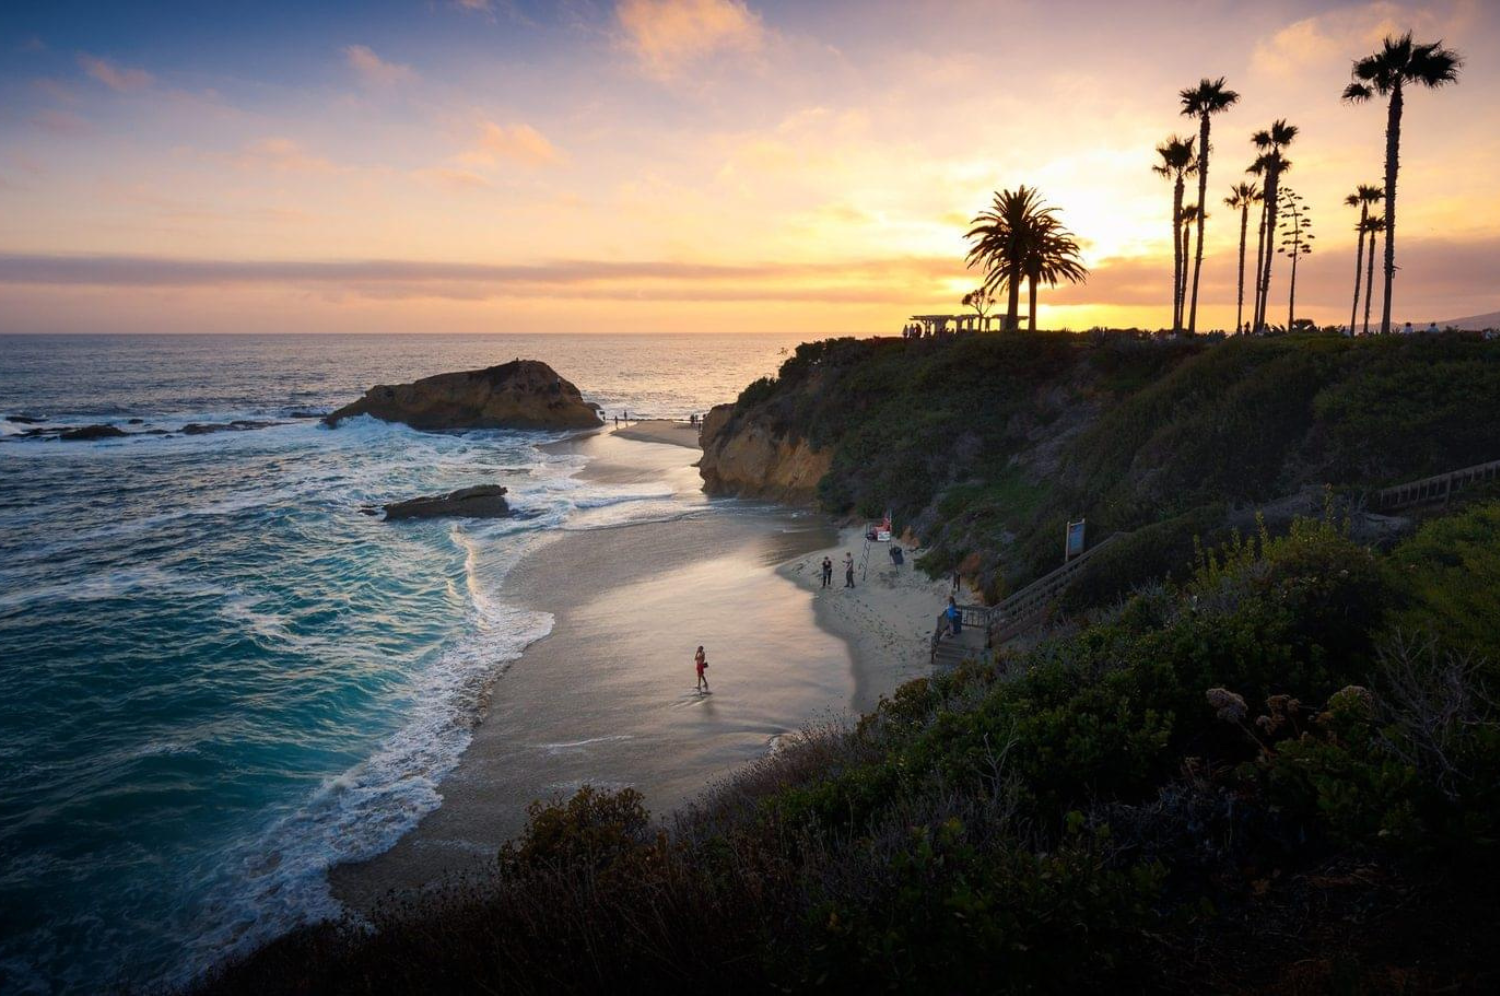 Landscape image of Southern California at sunset.